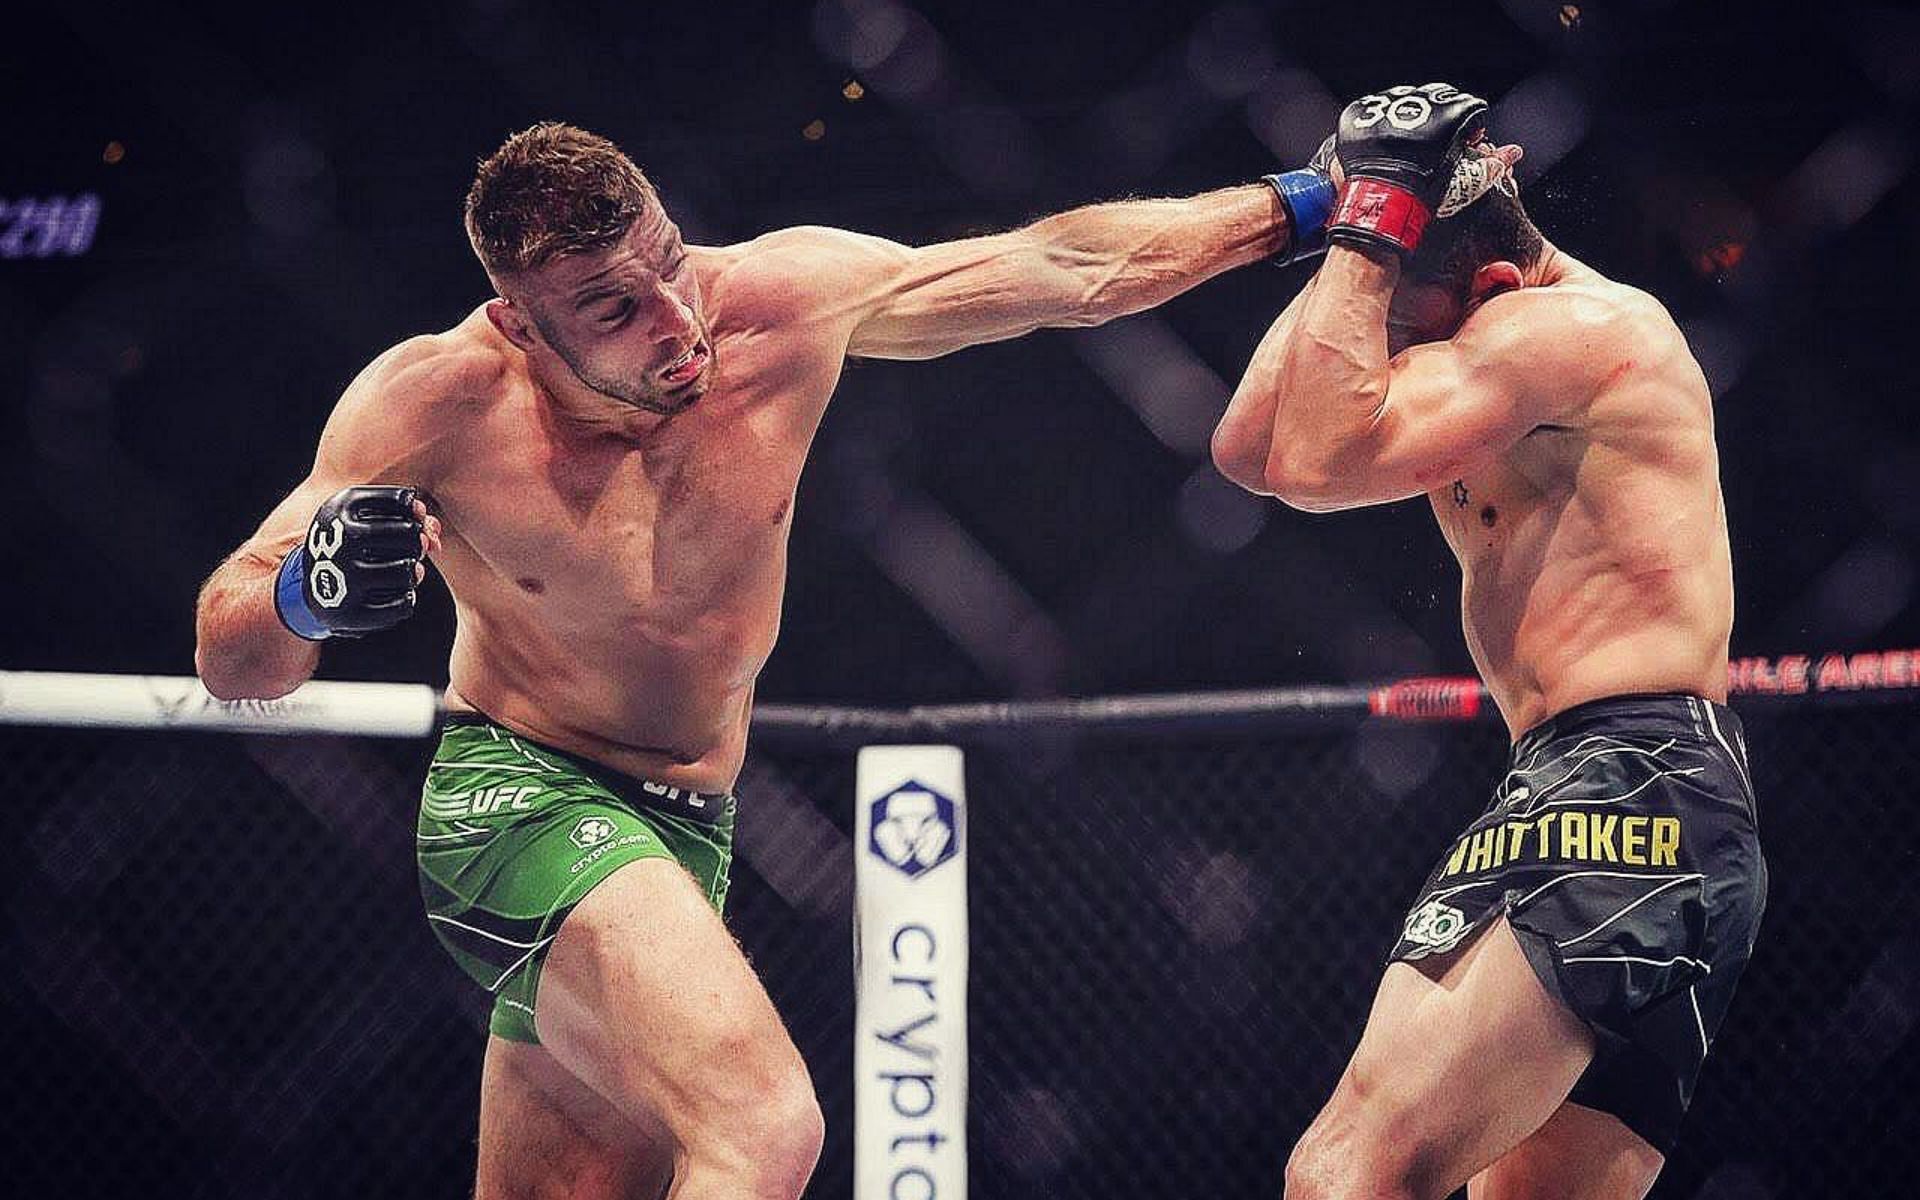 Dricus du Plessis has proven to be a deadly finisher during his UFC career [Image Credit: @dricusduplessis on Instagram]